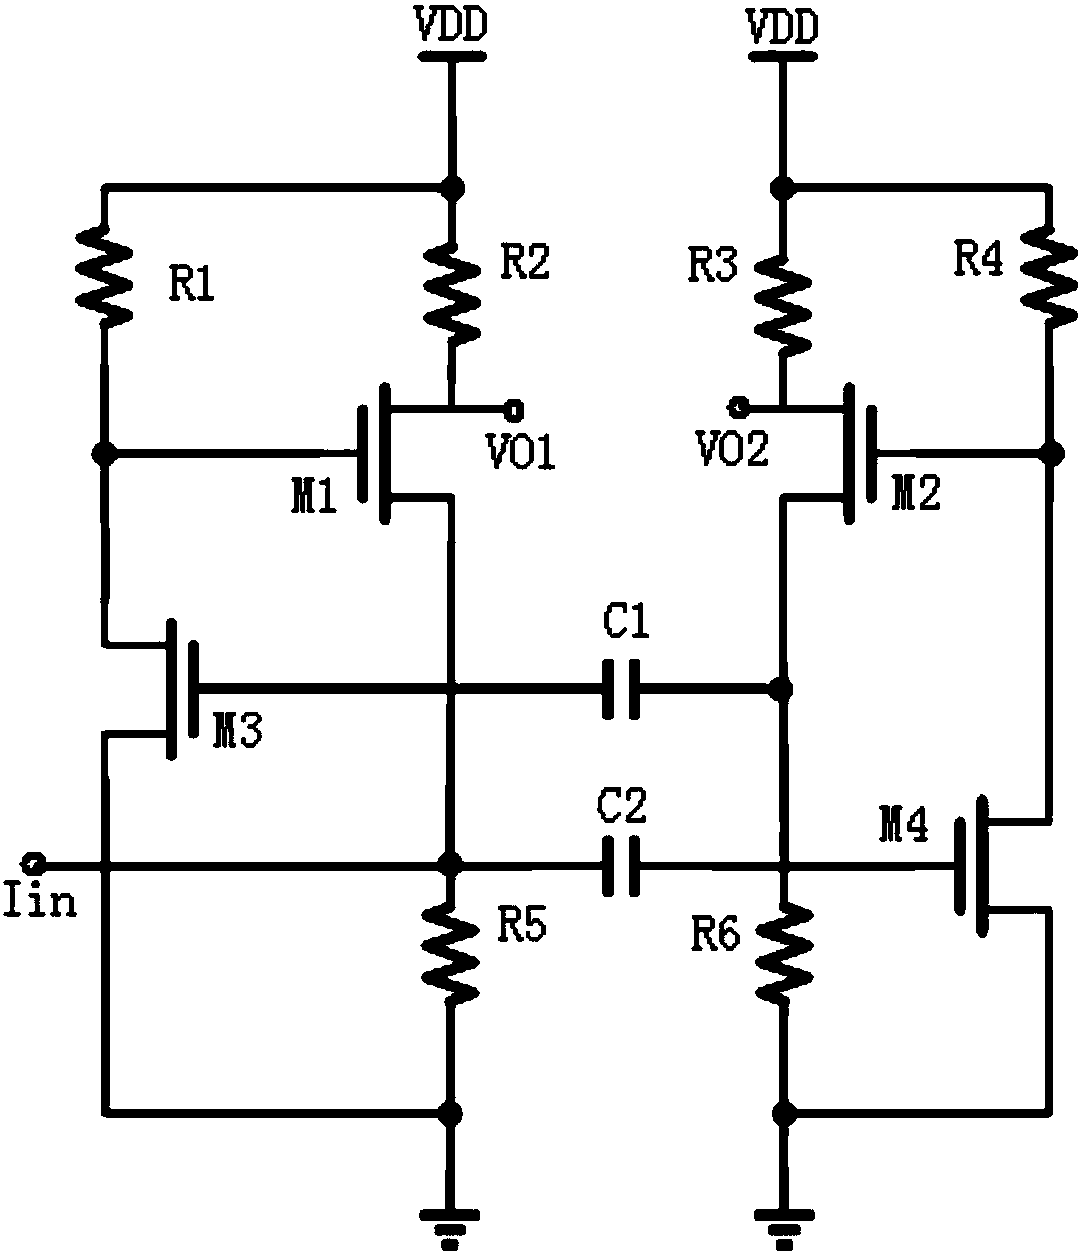 Single-end-to-differential transimpedance amplifier based on CMOS process